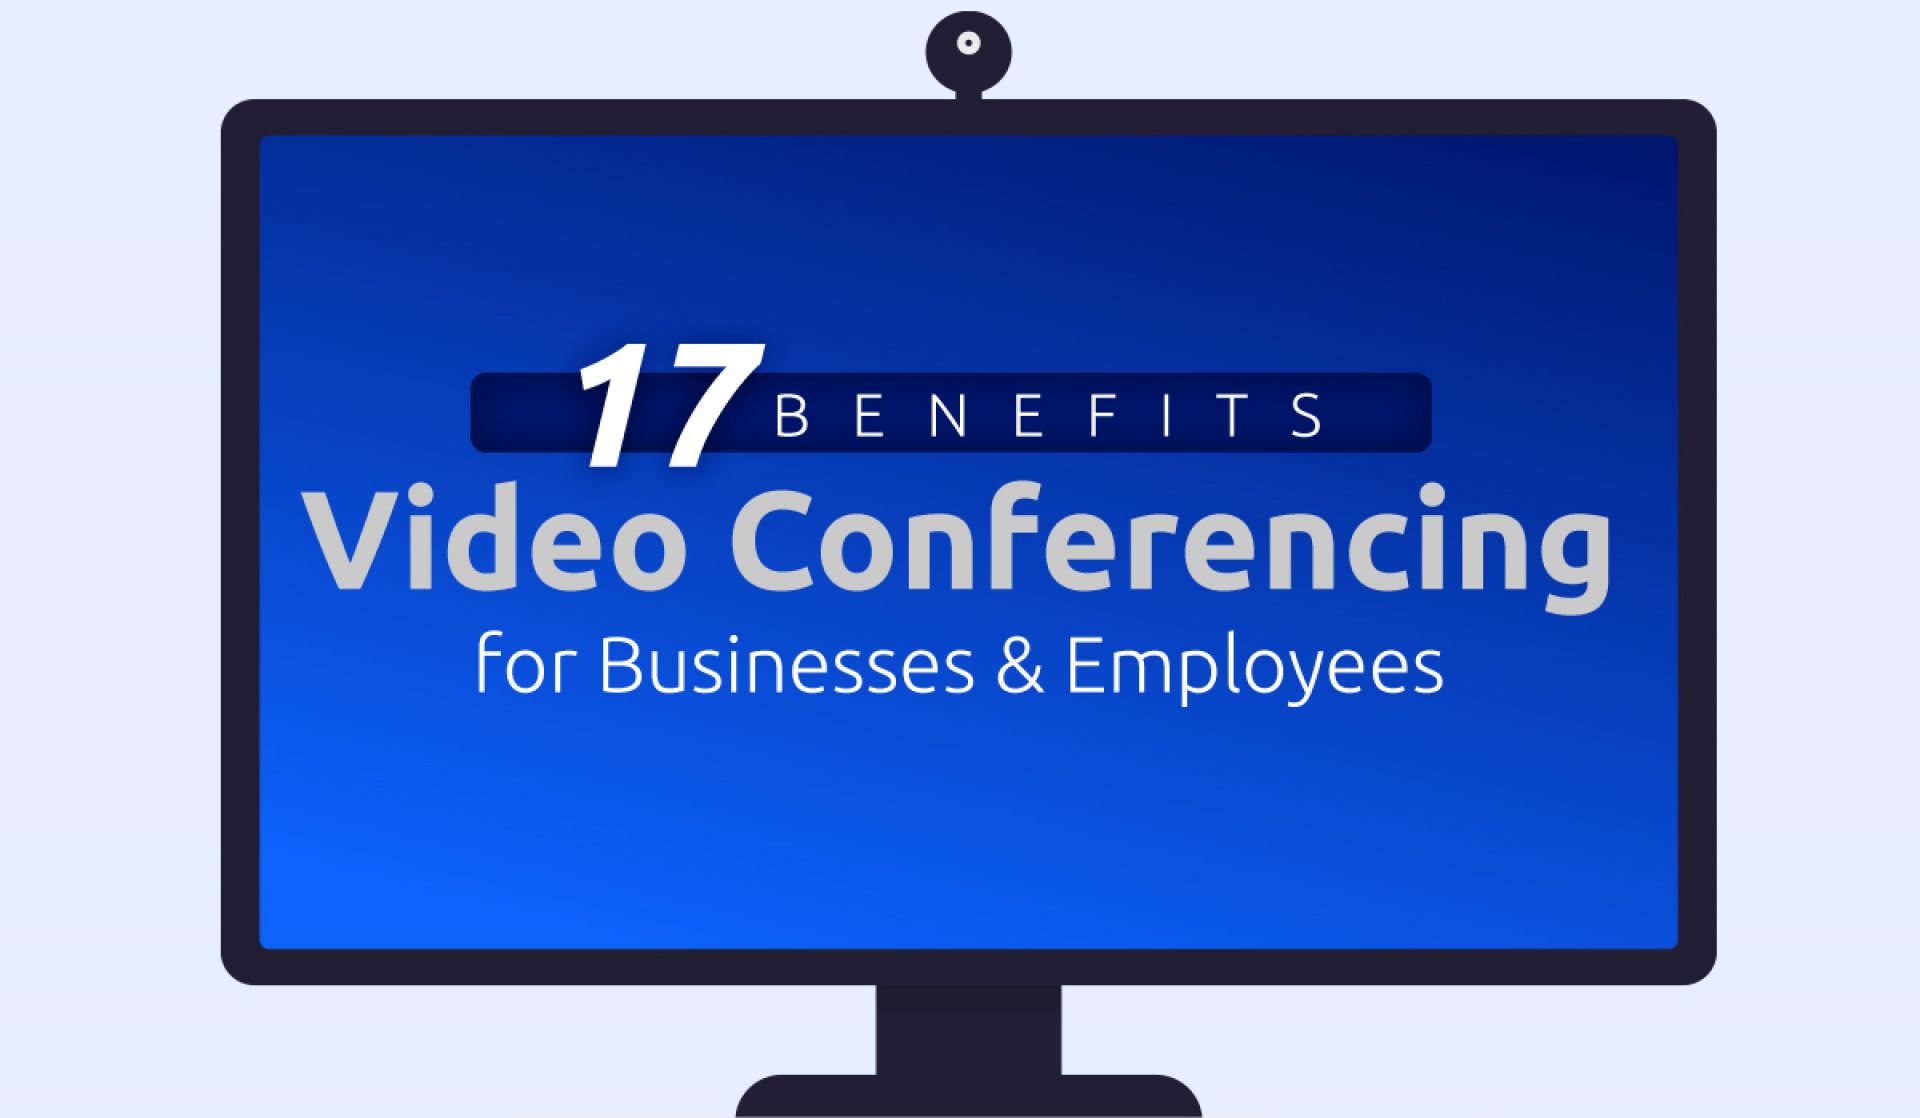 Top 17 Benefits of Video Conferencing: Advantages for Employees, Businesses & Customers [with 4 Disadvantages]